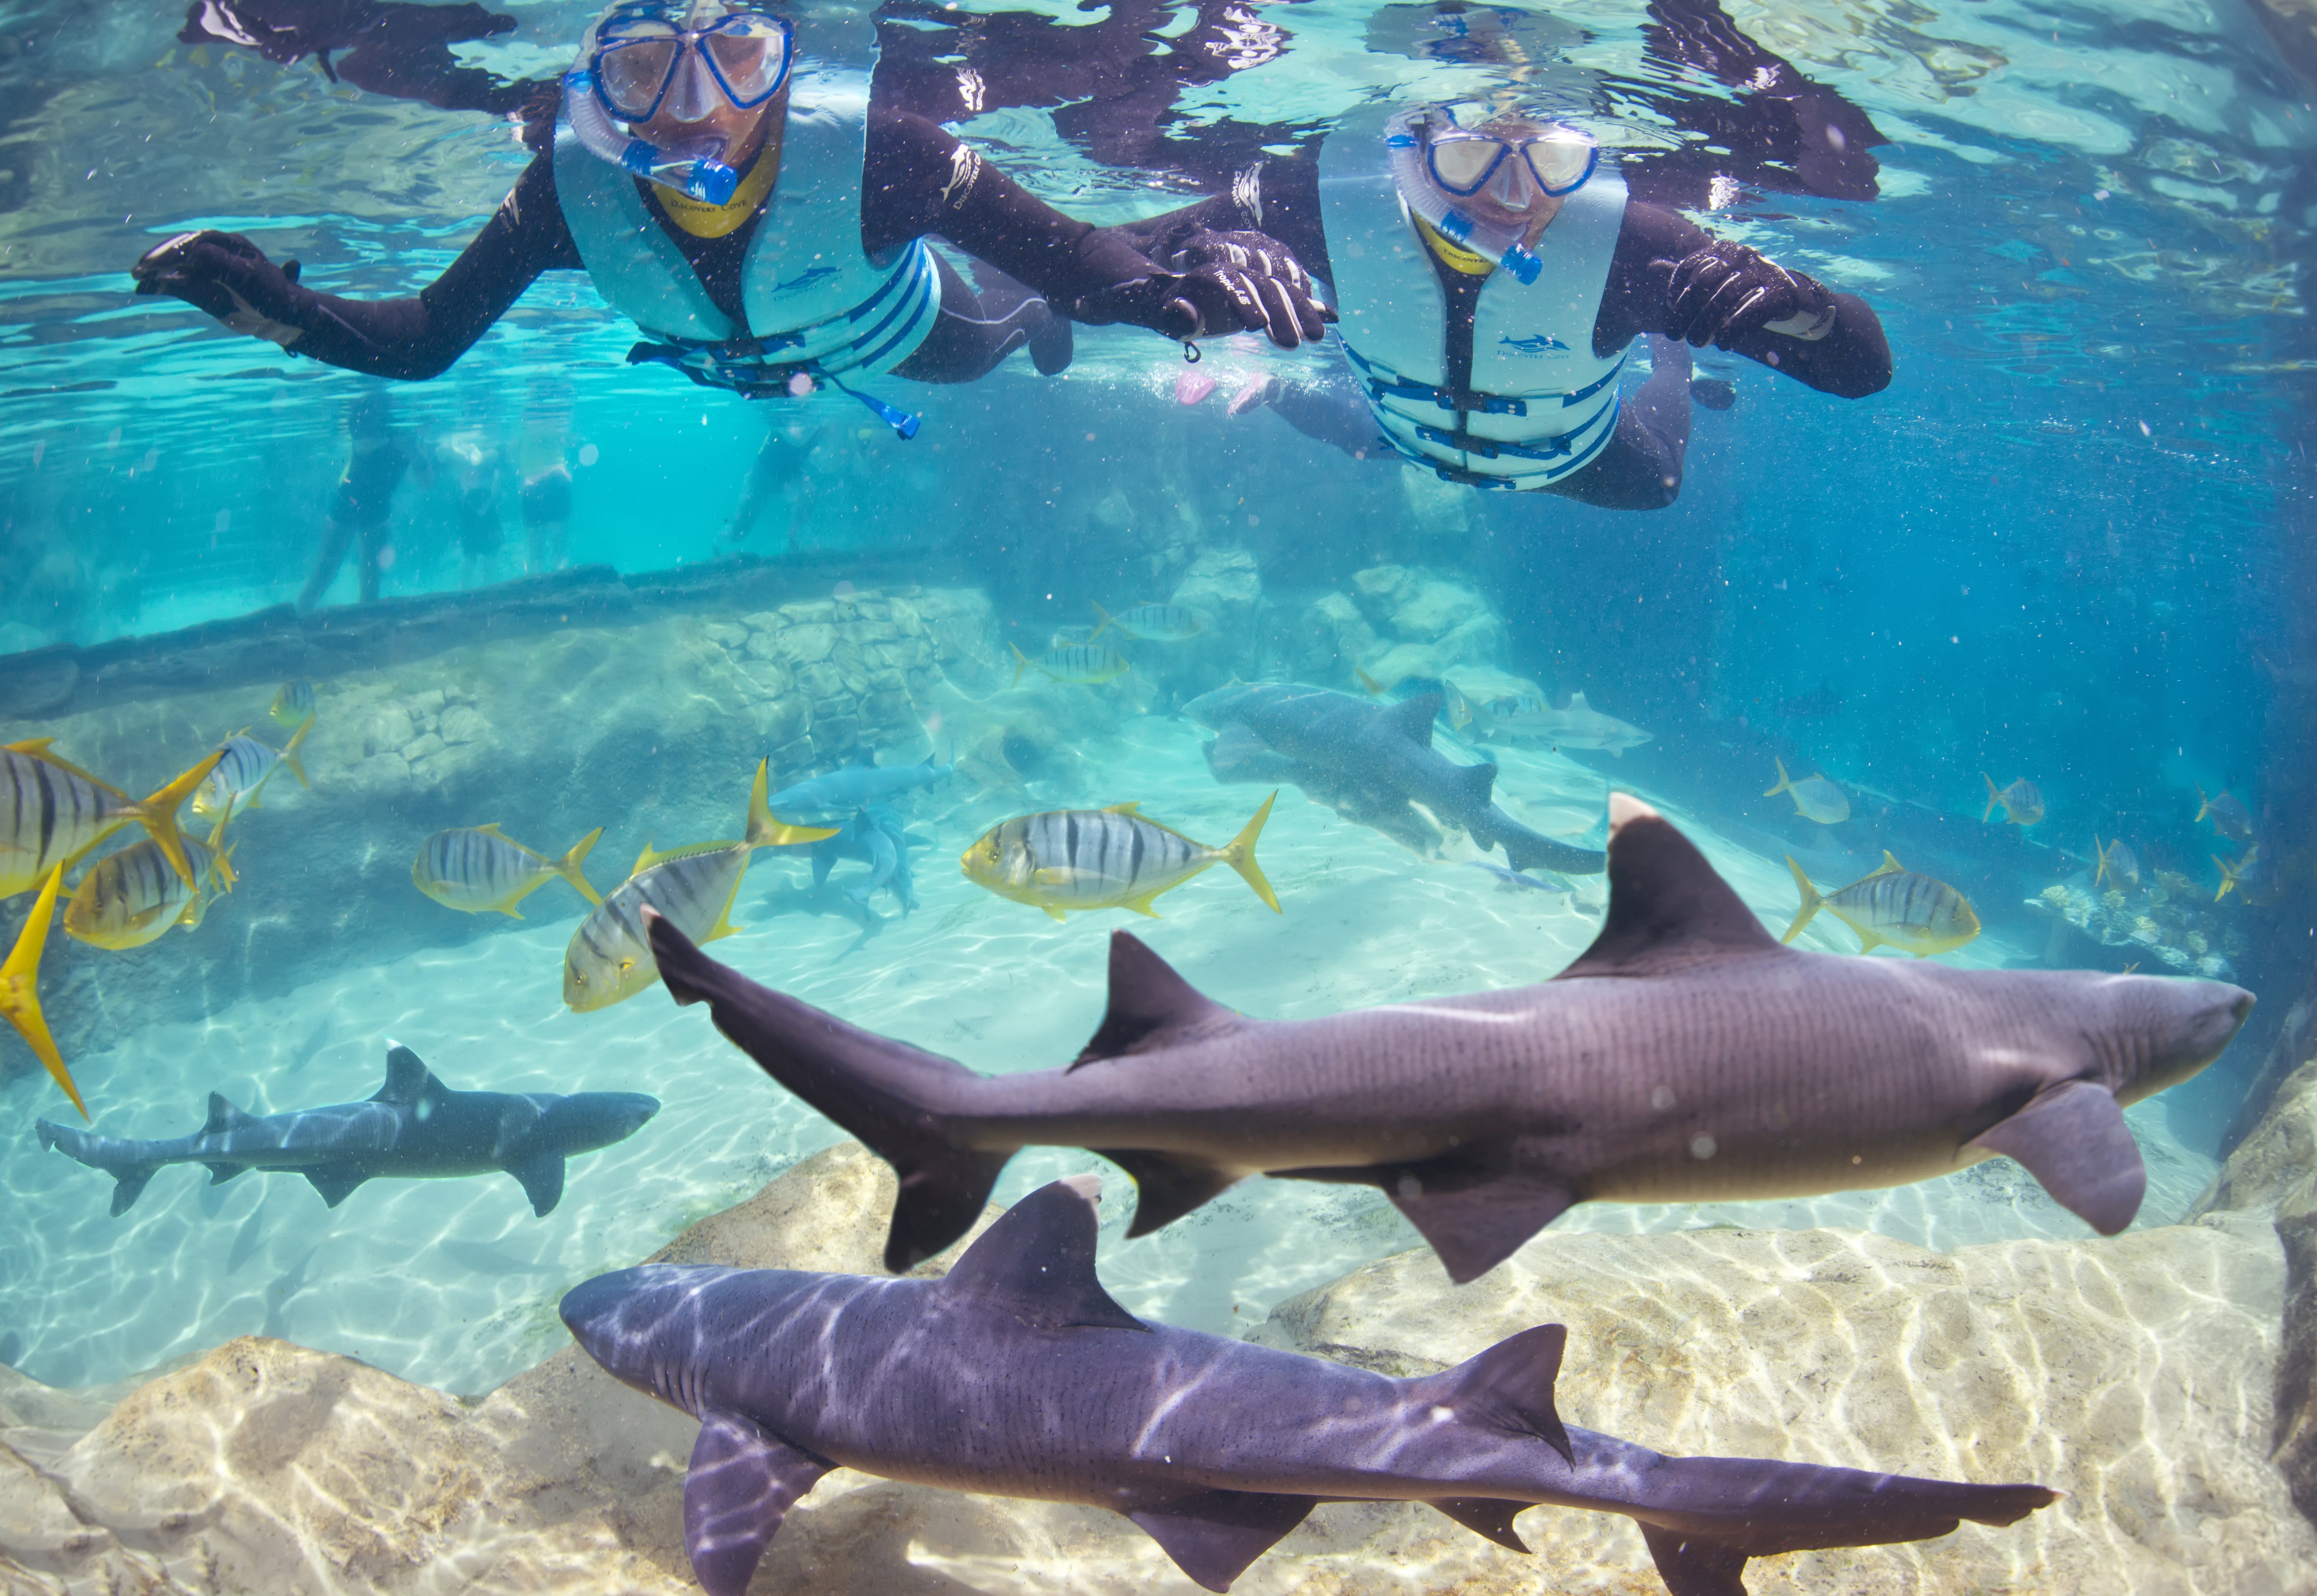 Discovery Cove now offers a swim with the sharks experience